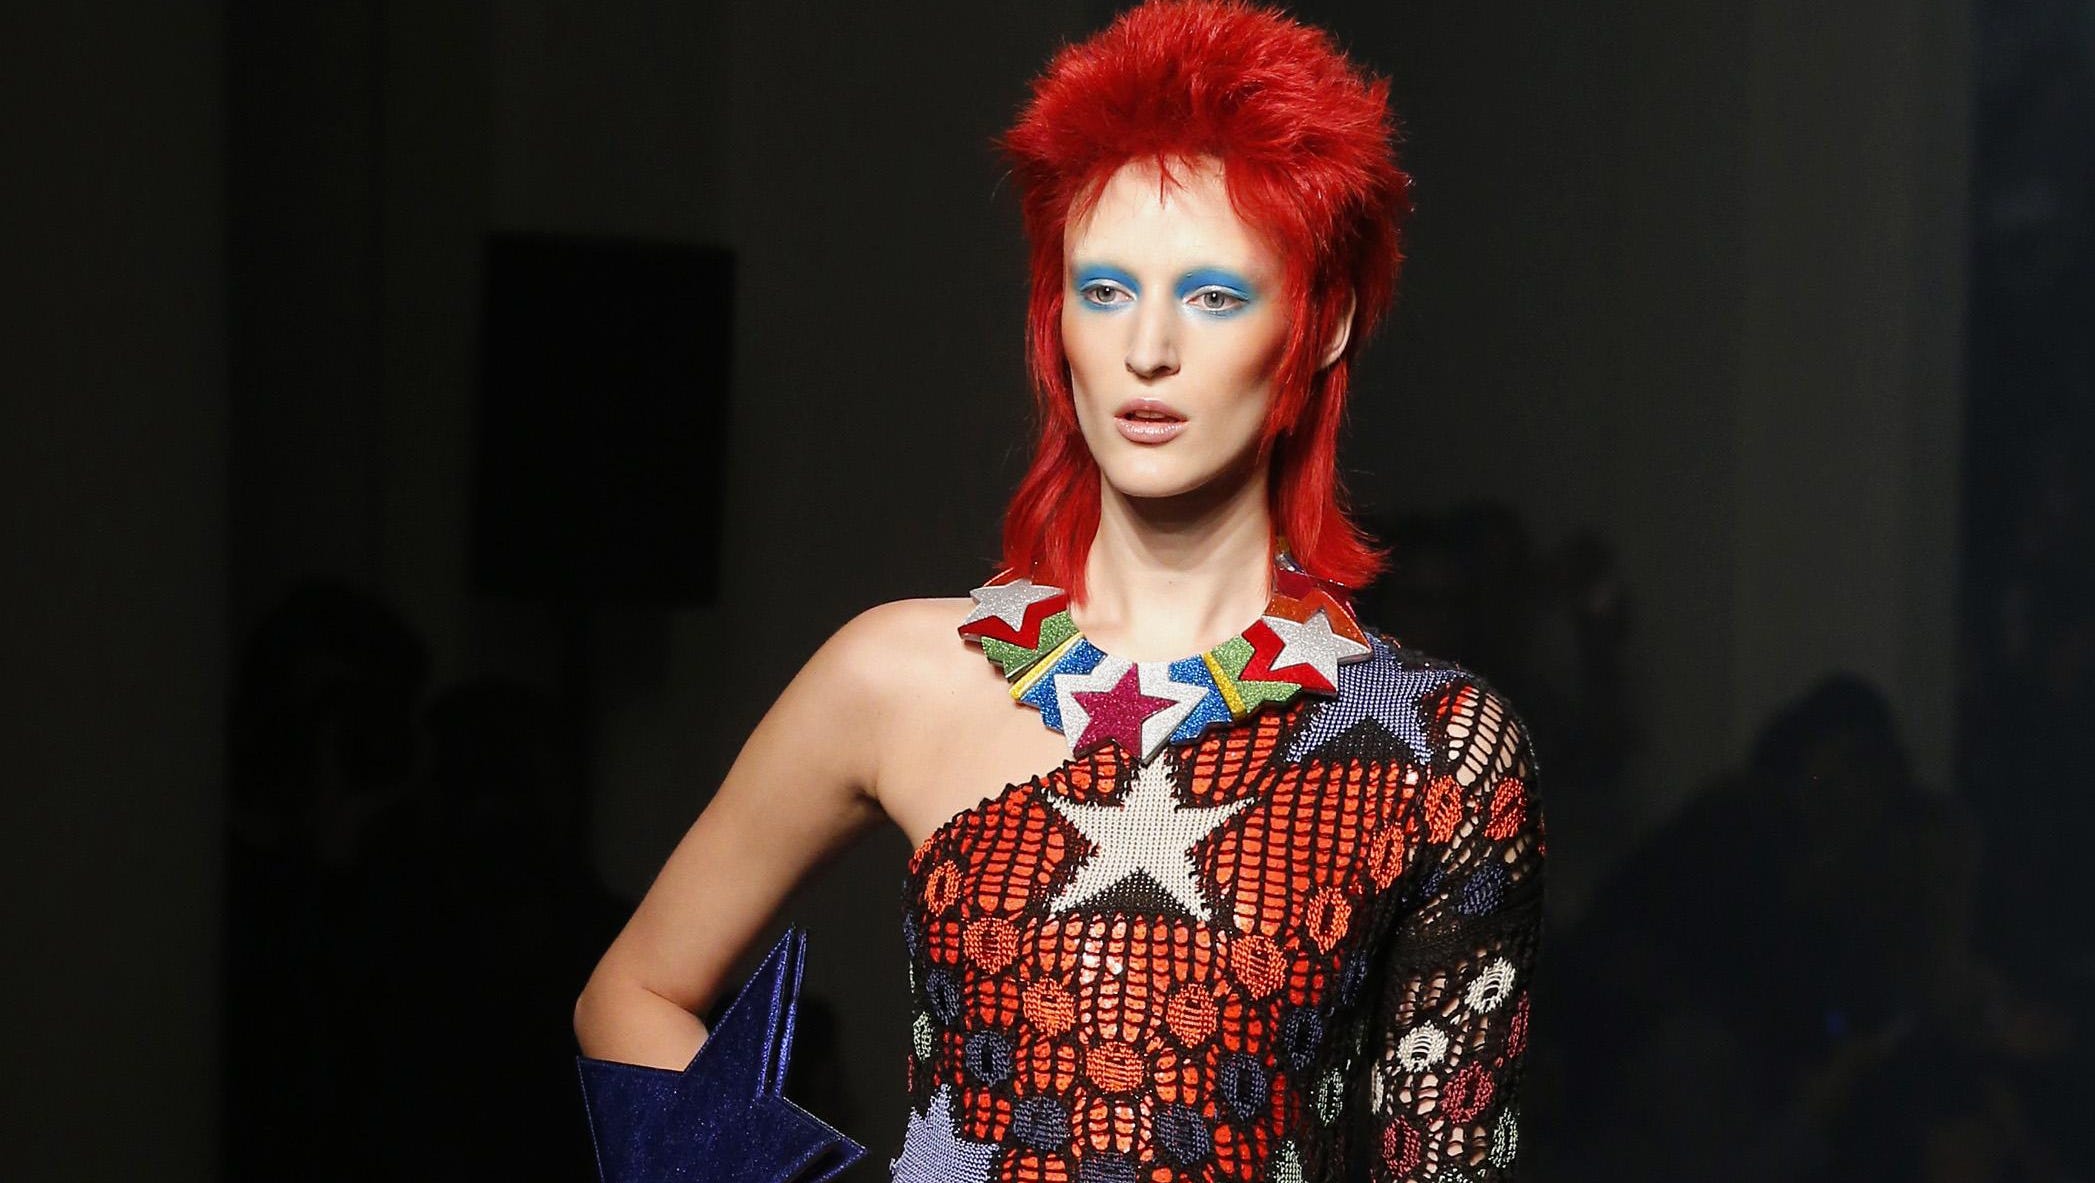 David Bowie held powerful influence on fashion design